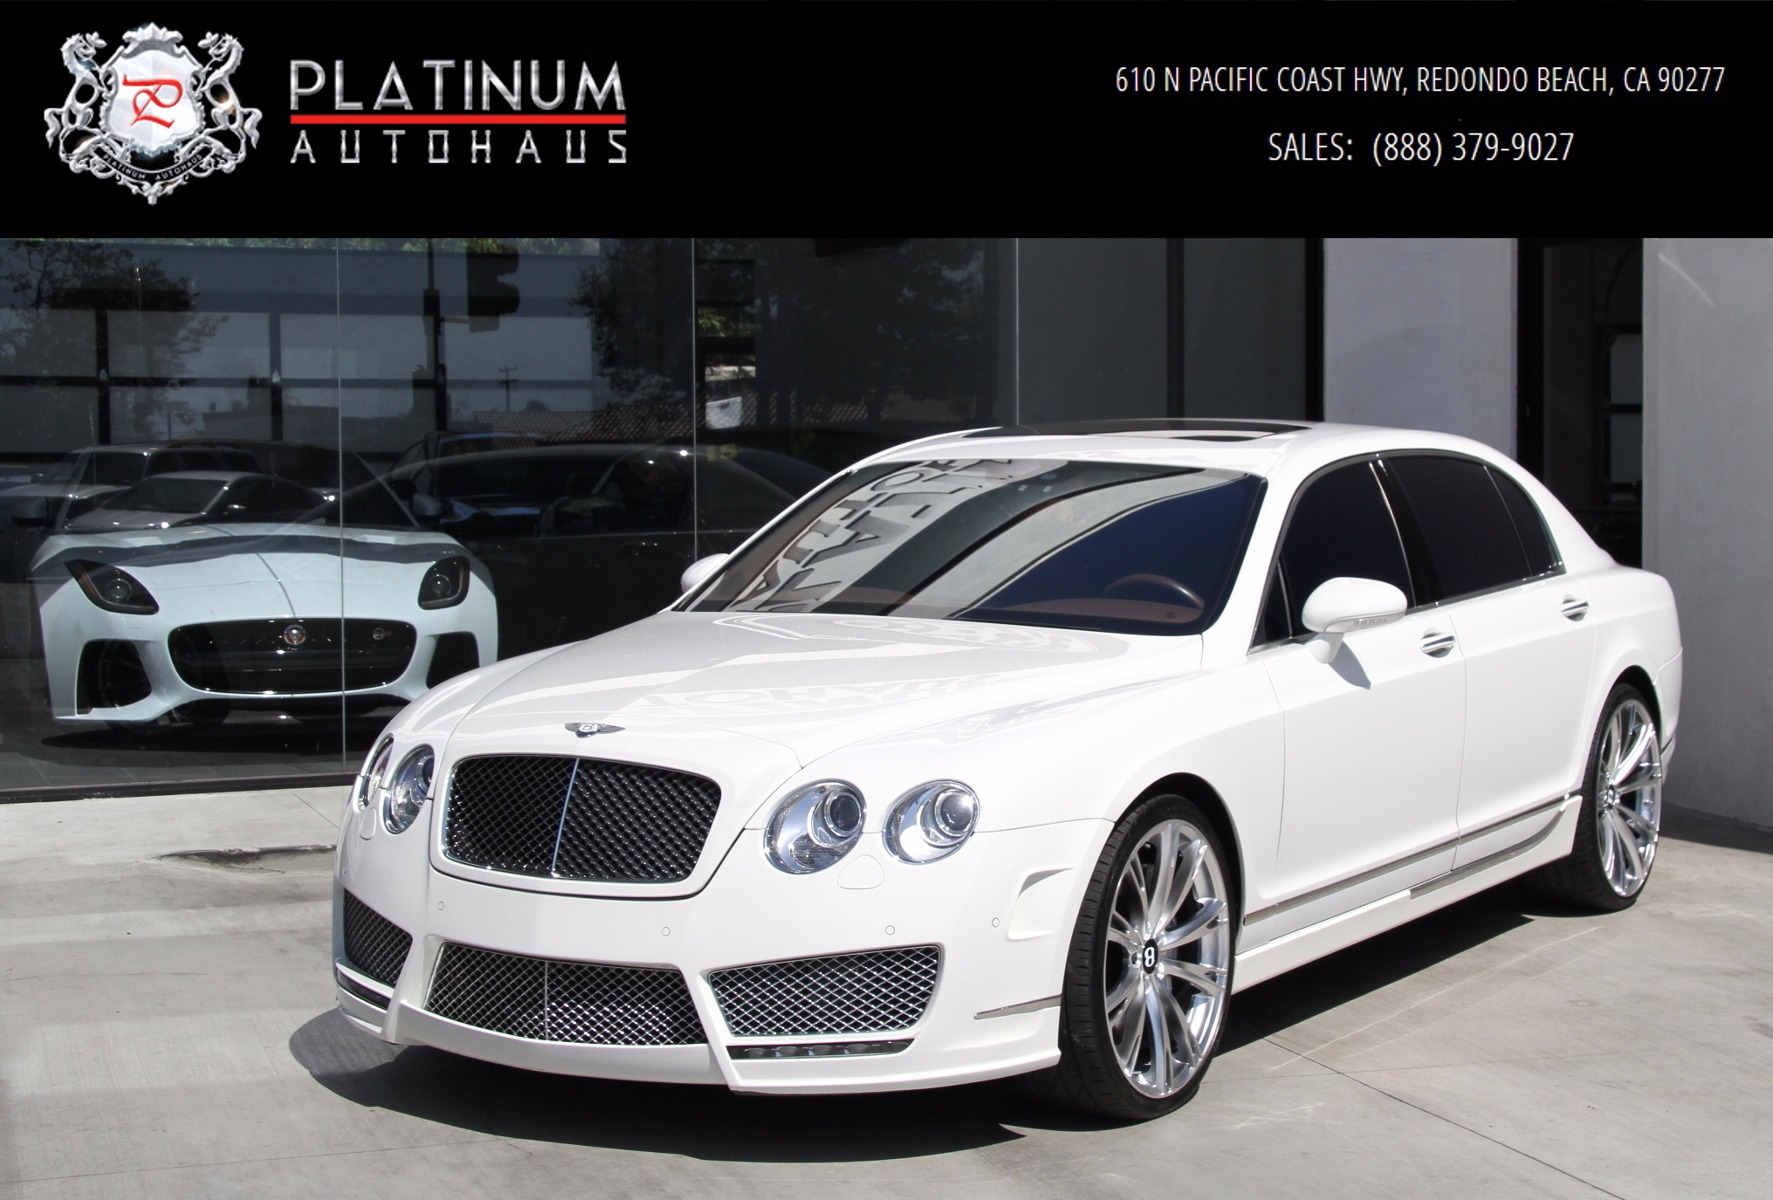 2009 Bentley Continental Flying Spur Speed ** MANSORY EDITION ** Stock #  5874A for sale near Redondo Beach, CA